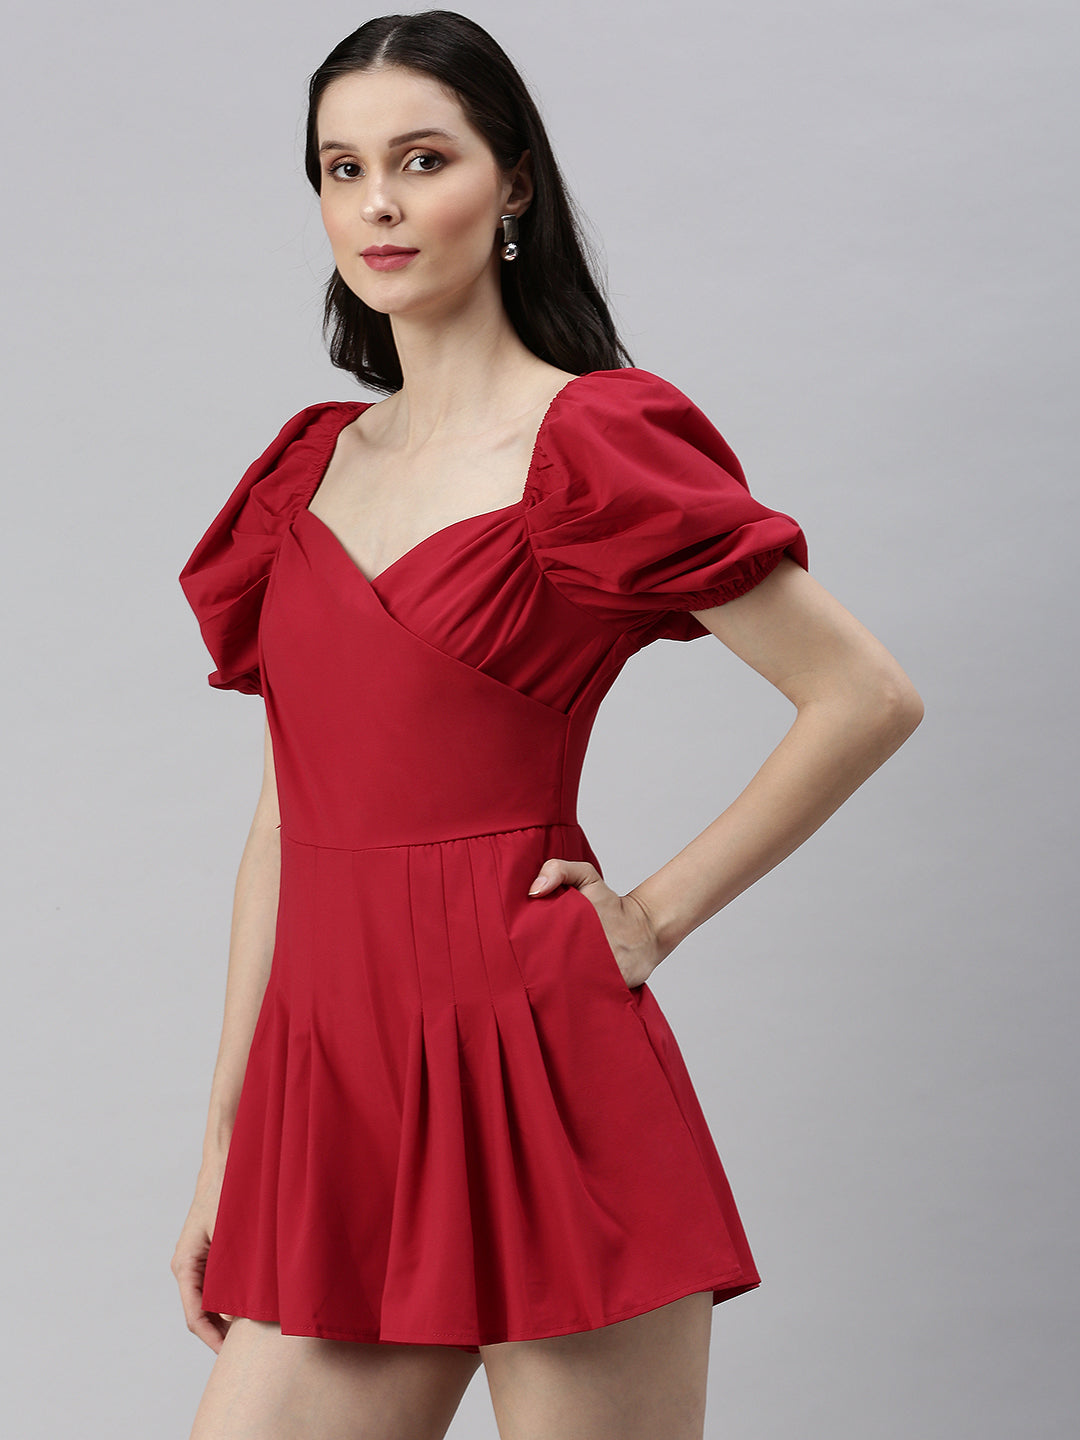 Women Sweetheart Neck Solid Red Playsuit